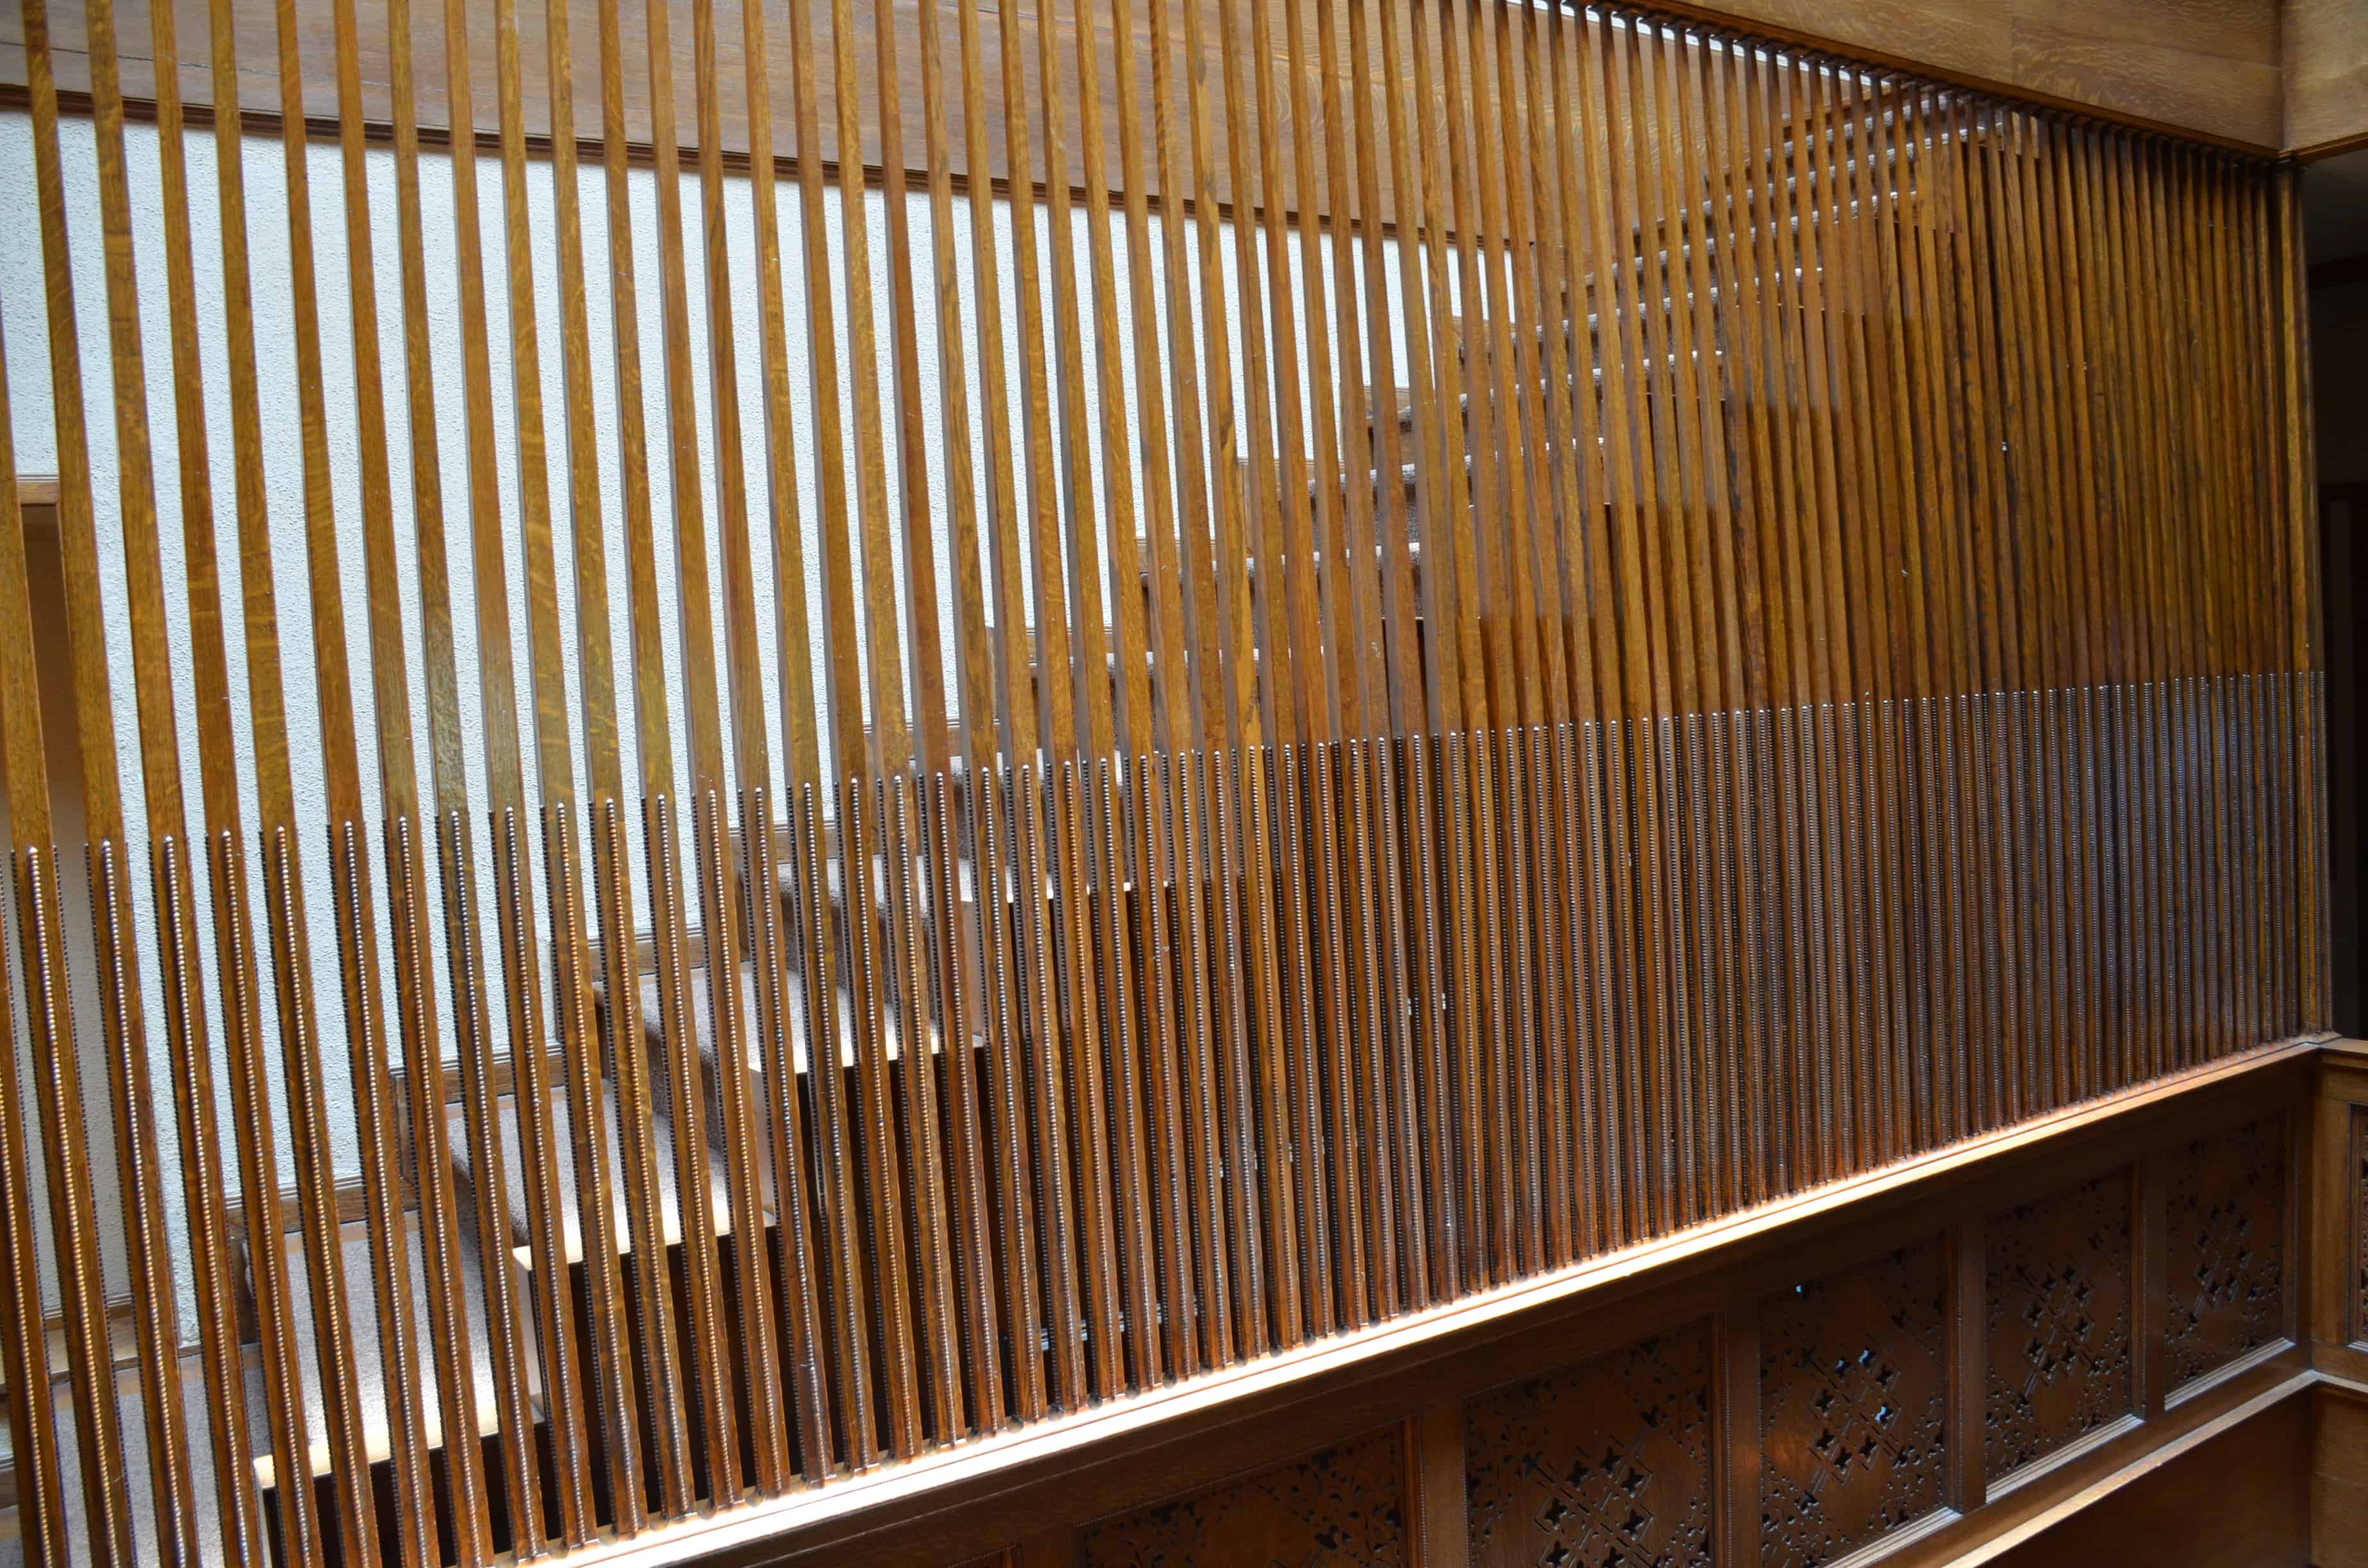 Staircase screen of the Charnley-Persky House in Chicago, Illinois